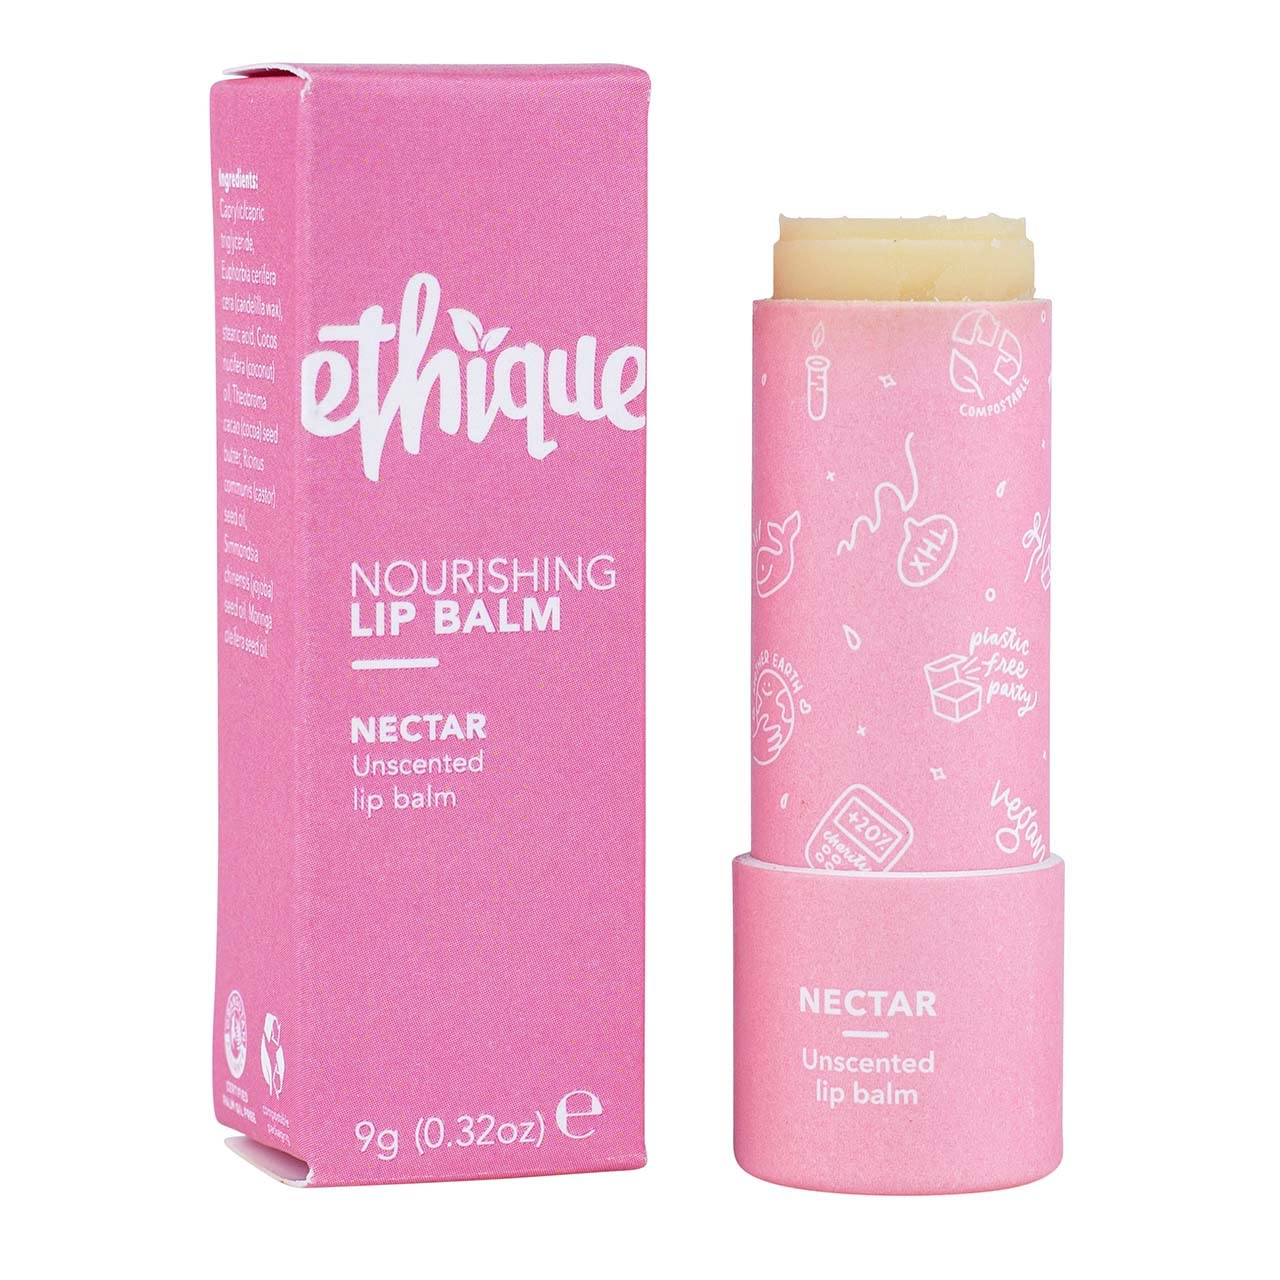 Ethique Nectar Unscented Lip Balm - Plastic-Free, Vegan, Cruelty-Free, Eco-Friendly, 0.32 oz (Pack of 1)